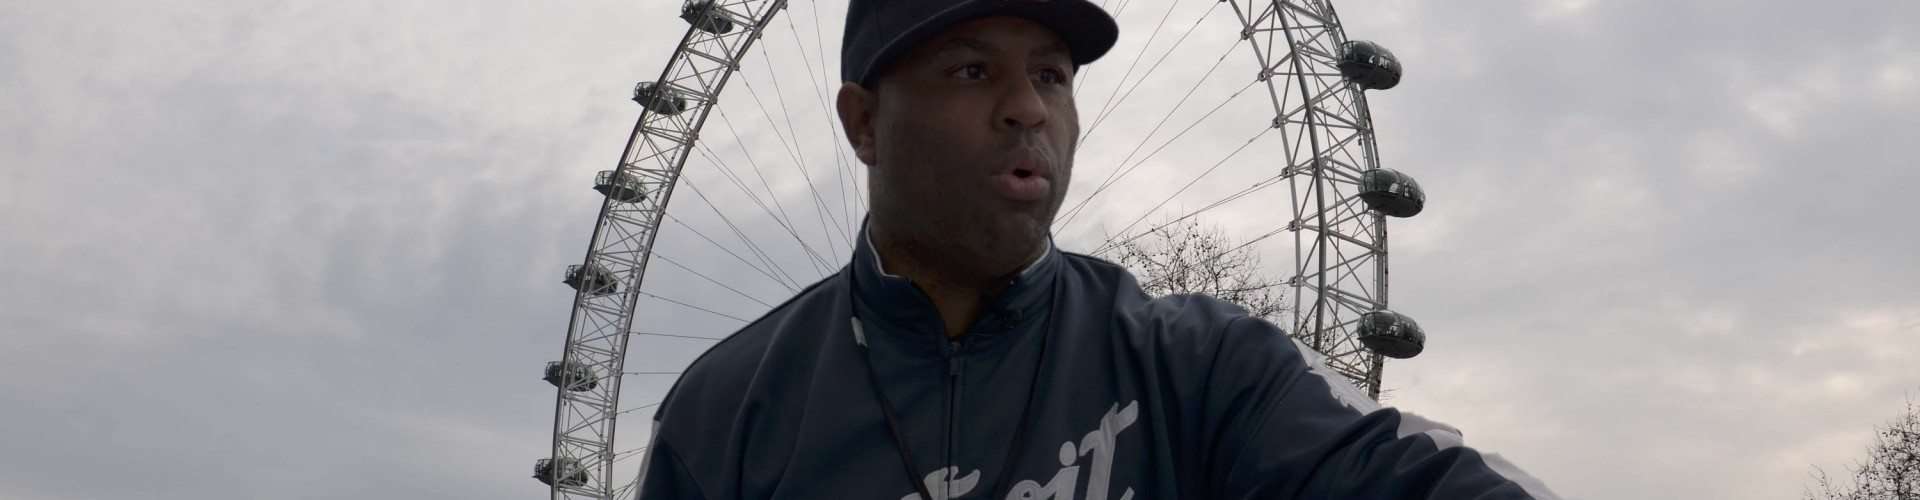 Eric Thomas Throws Down Some Motivational Fire [VIDEO]